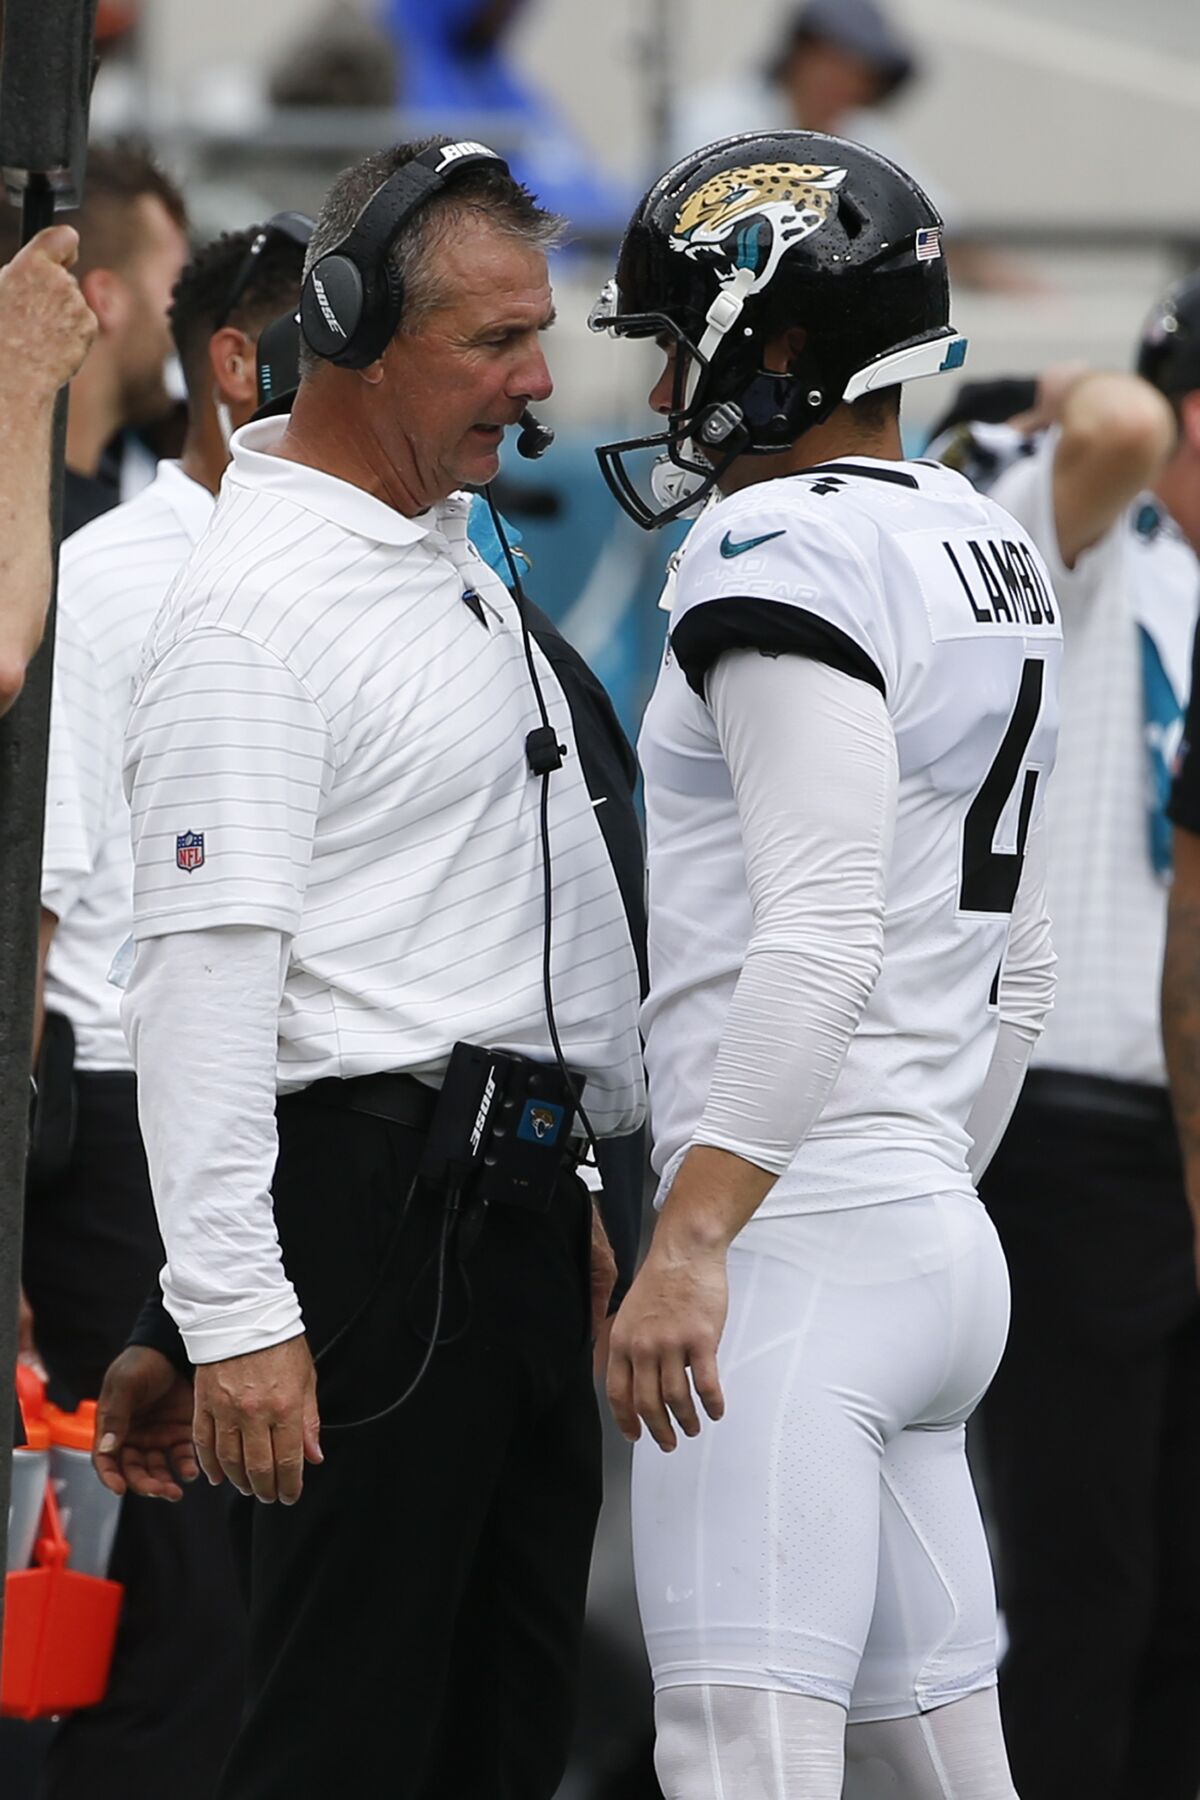 Jacksonville Jaguars head coach Urban Meyer, left, talks with place kicker Josh Lambo after Lambo missed his second field goal against the Denver Broncos during the first half of an NFL football game, Sunday, Sept. 19, 2021, in Jacksonville, Fla. (AP Photo/Stephen B. Morton)